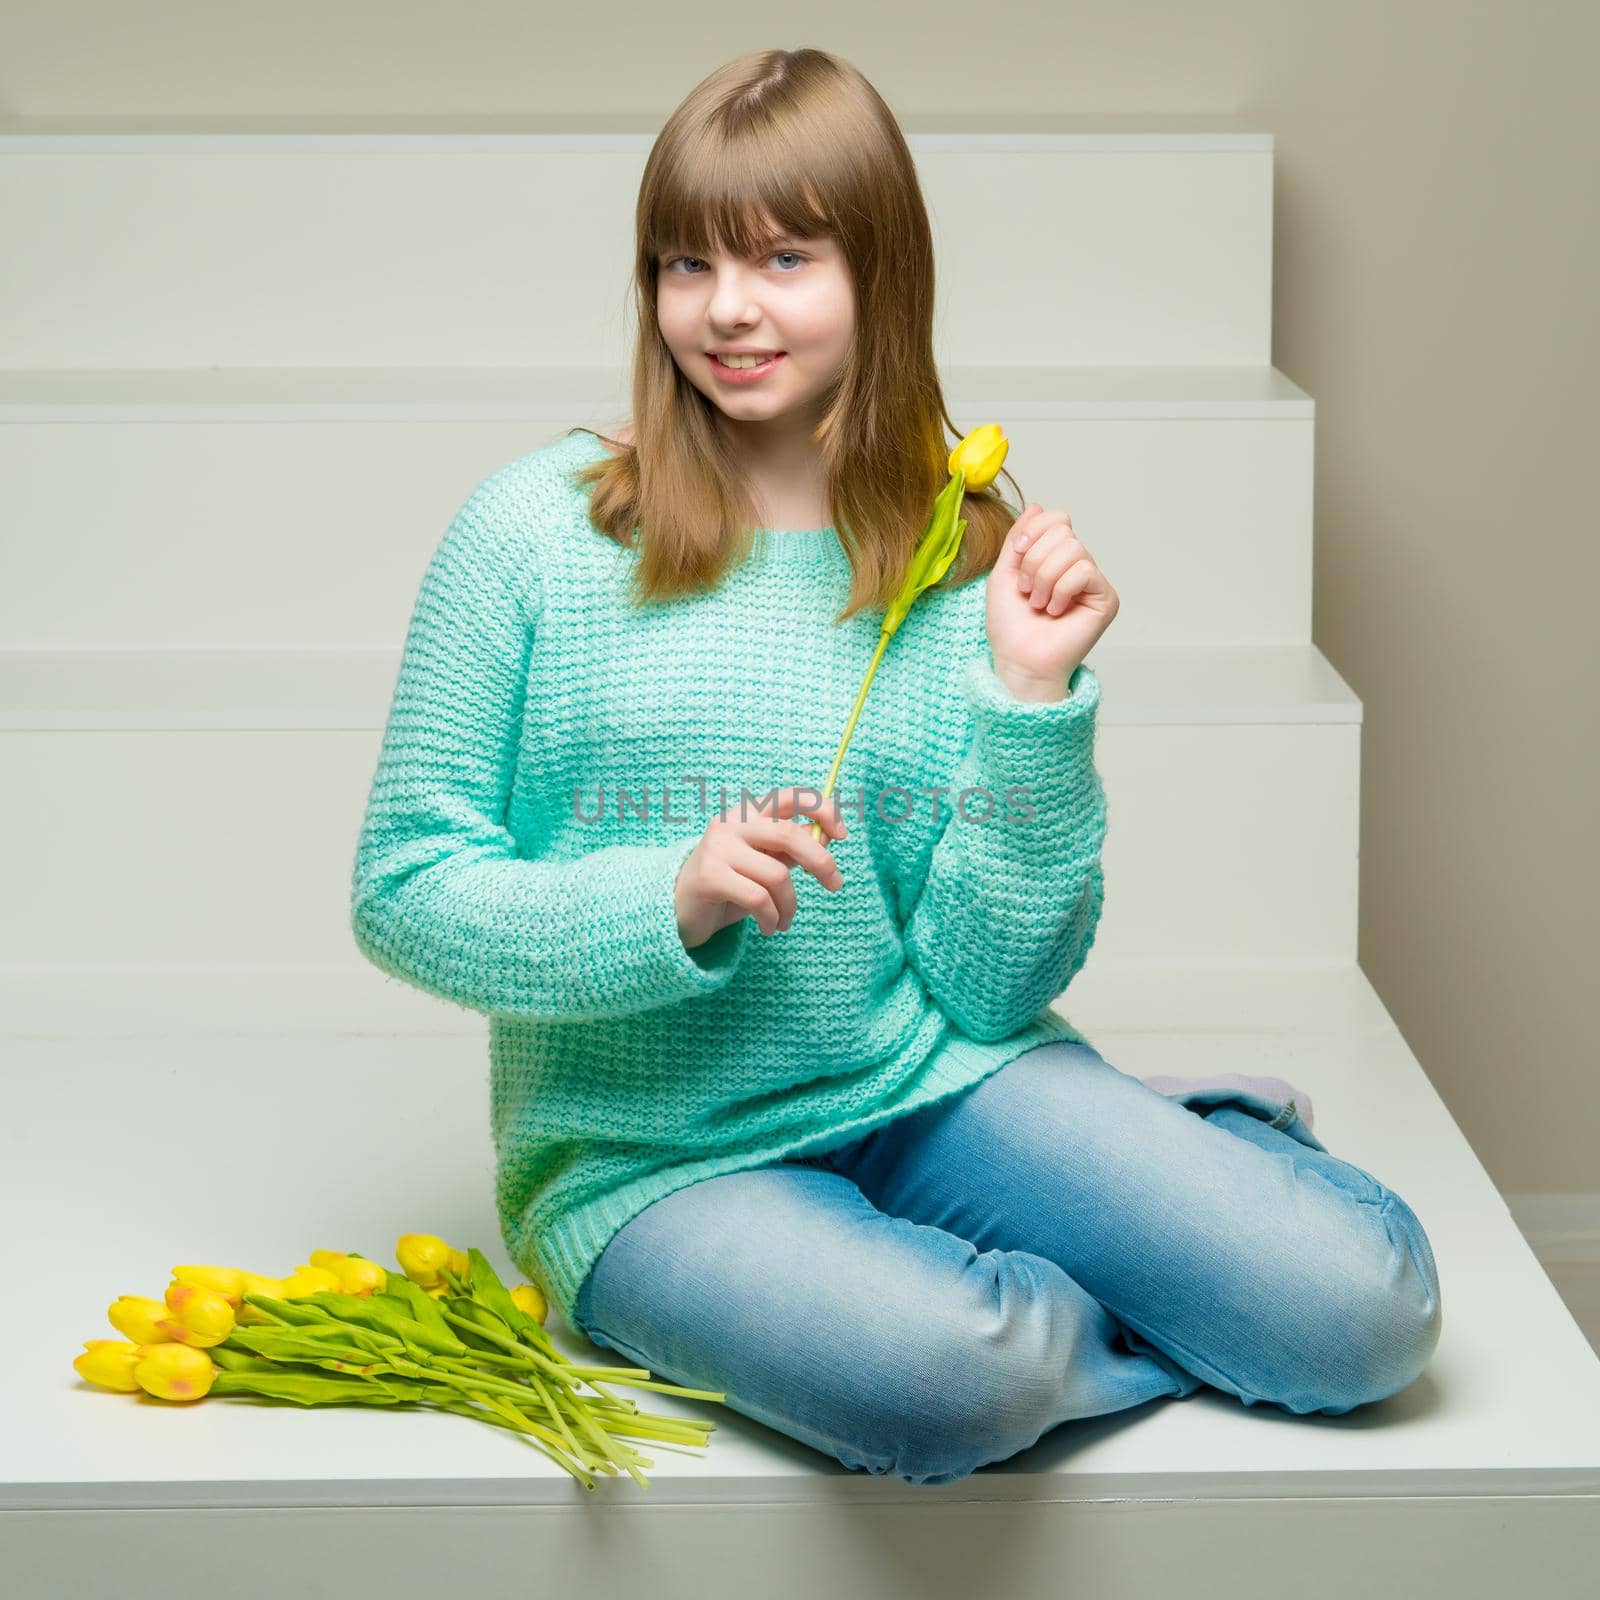 A cute little girl with a bouquet of tulips sits on a white staircase. The concept of happy people, spring mood.